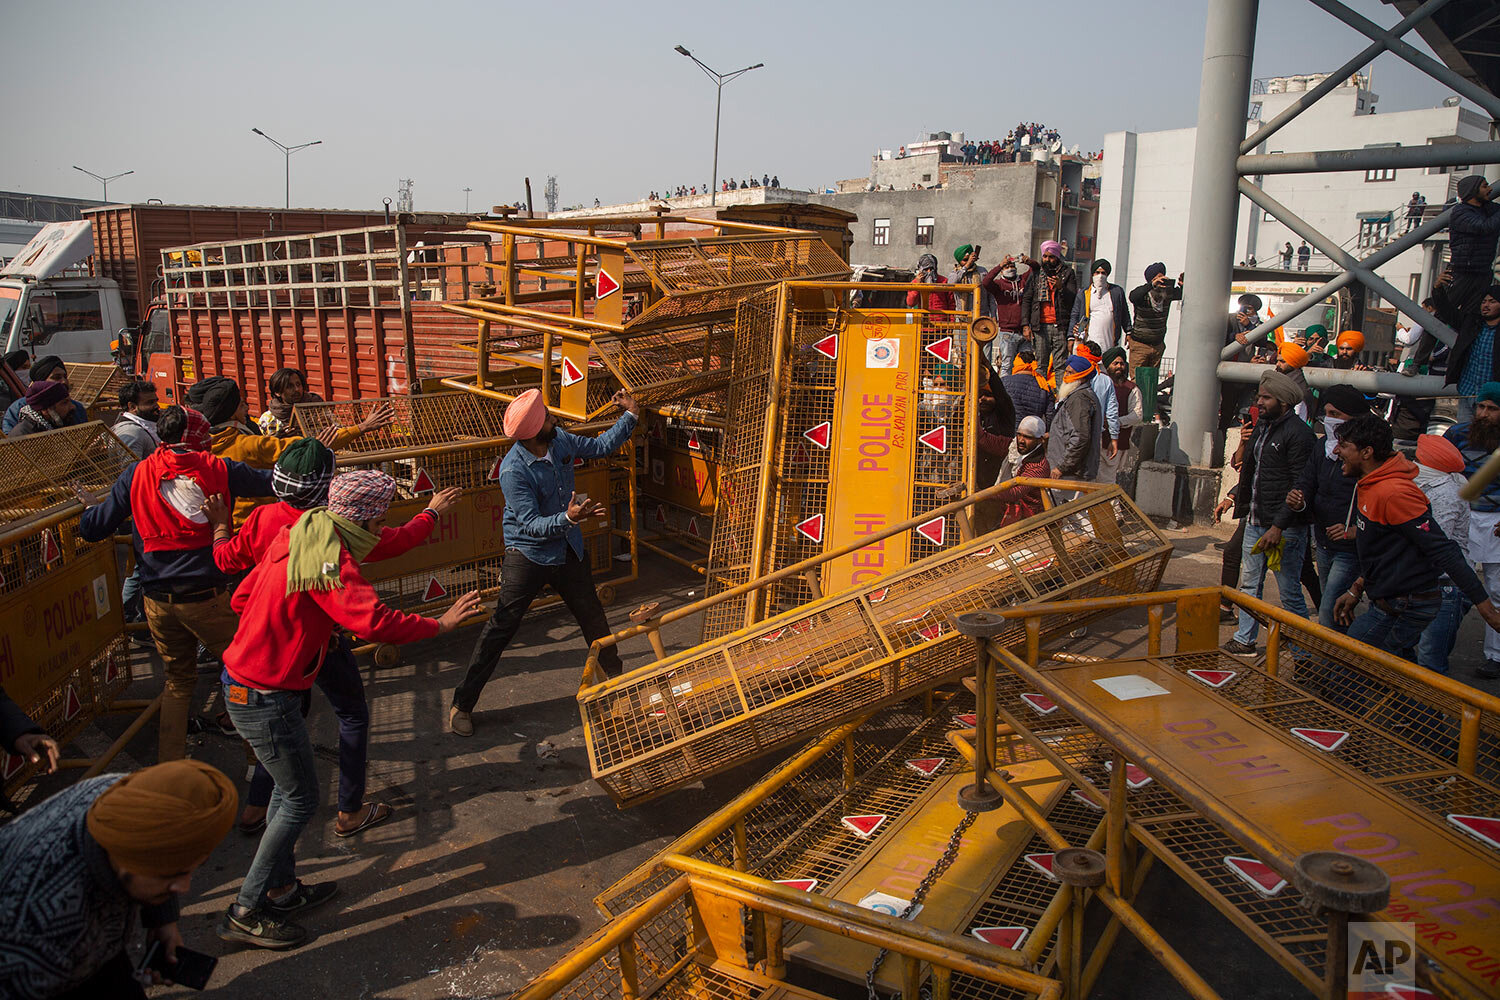  Protesting farmers remove police barricades as they march to the capital during India's Republic Day celebrations in New Delhi, India, Tuesday, Jan. 26, 2021.  (AP Photo/Altaf Qadri) 